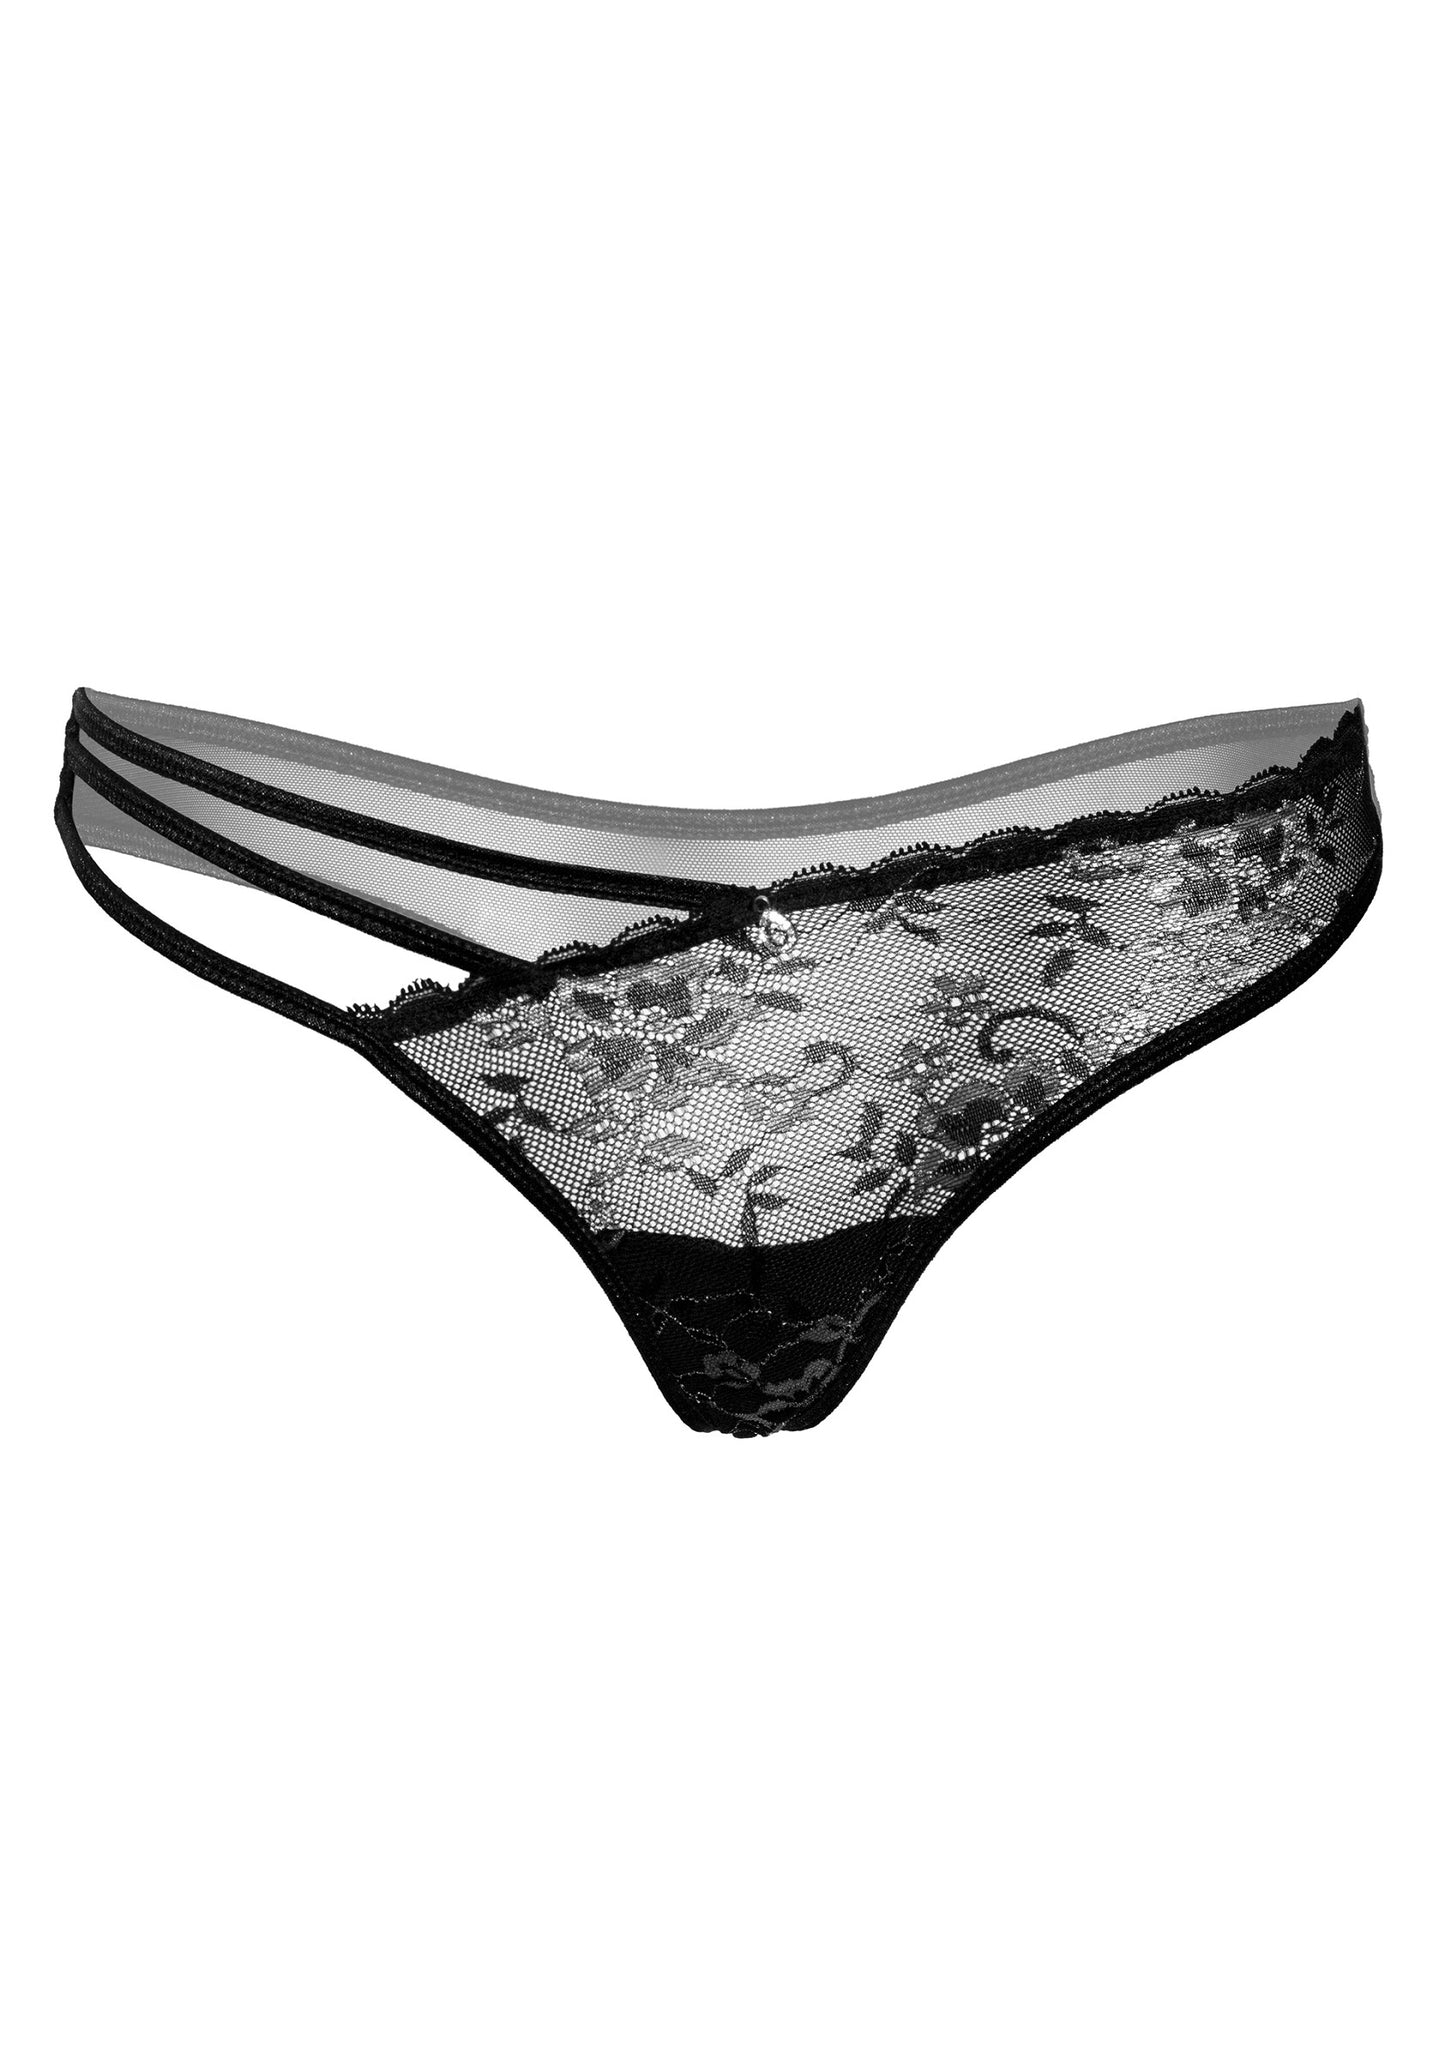 Daring Intimates Mix & Match Very sexy floral lace string BLACK S/M - 5